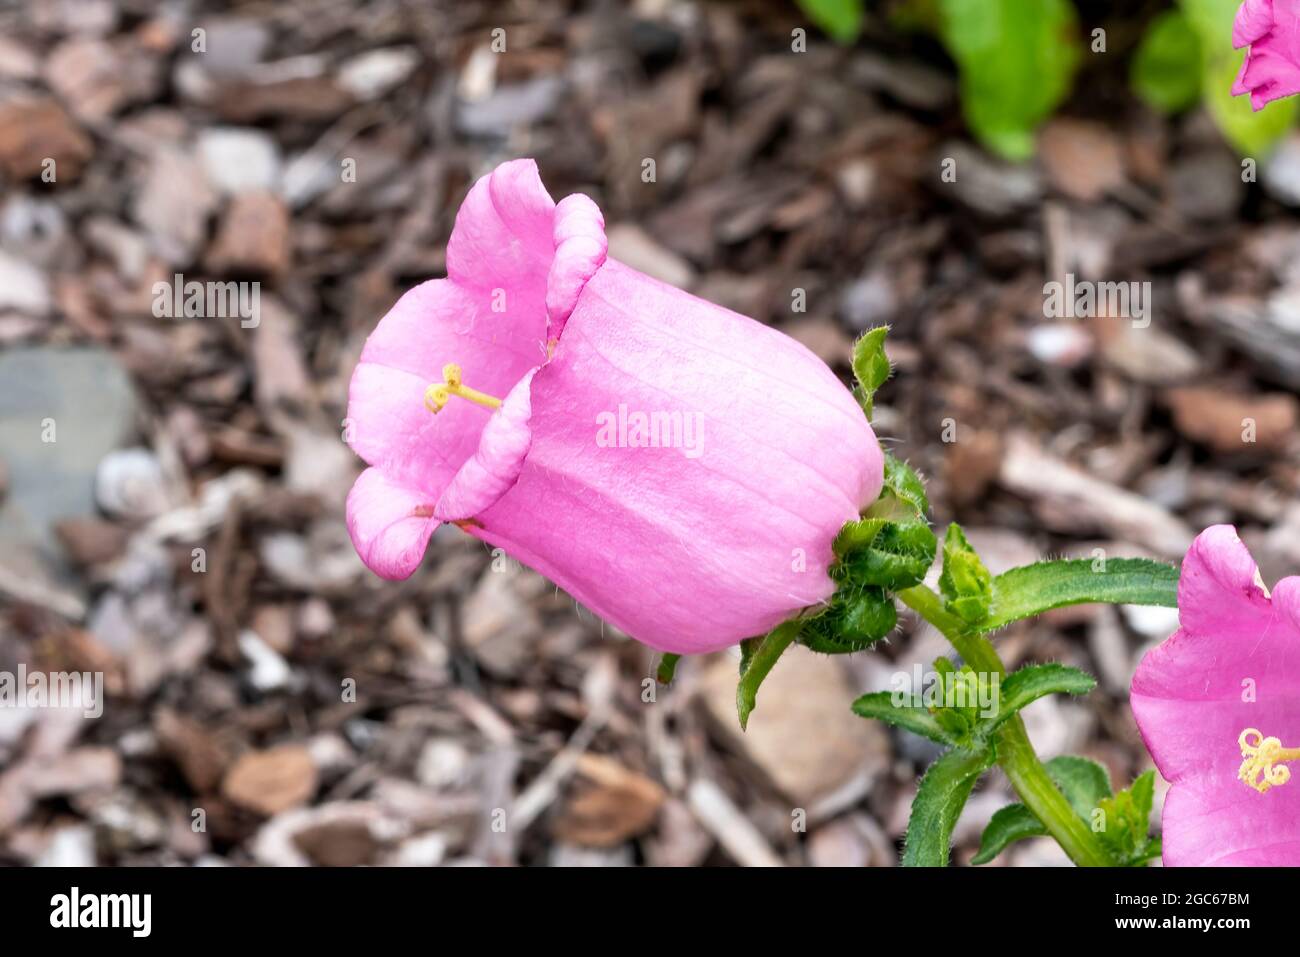 Campanula medium 'Champion Pink' a spring summer flowering plant with an upright springtime flower commonly known as Bellflower or Canterbury Bells, s Stock Photo